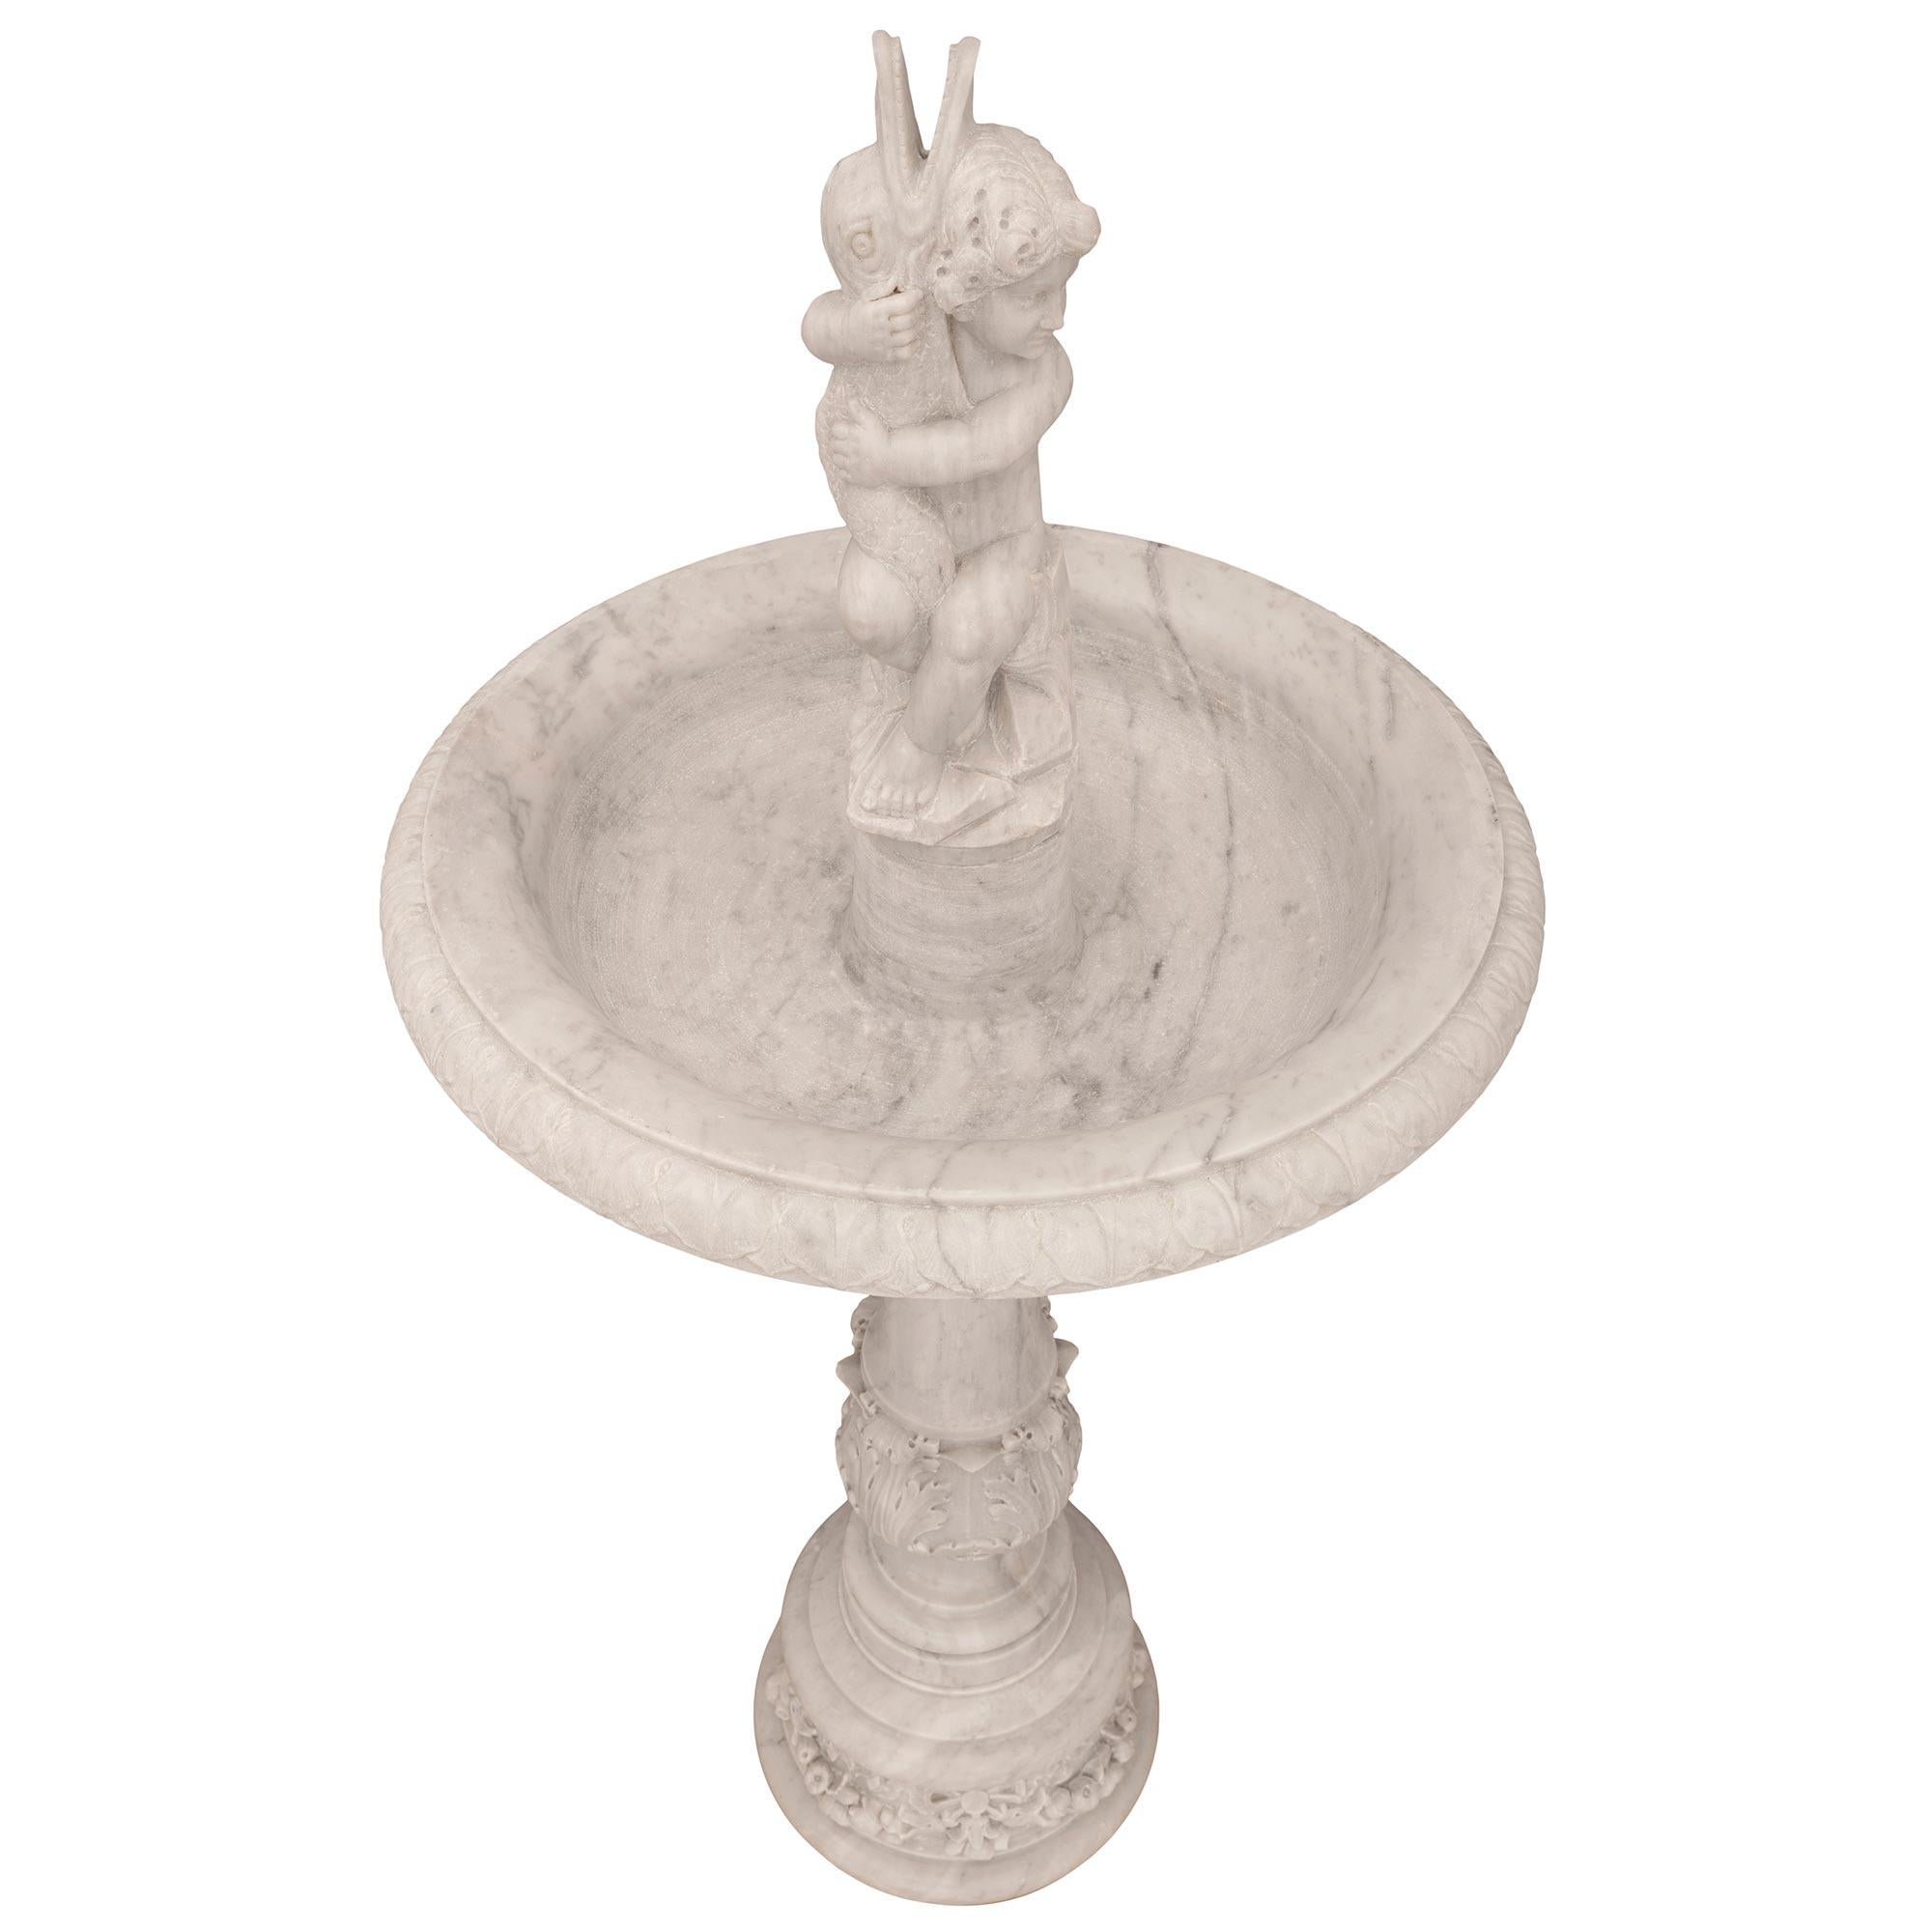 A beautiful and most elegant Italian 19th century white Carrara marble fountain. The fountain is raised by a circular base with a fine mottled border and exquisite richly sculpted blooming flowers and ripe fruit tied with wonderful flowing ribbons.